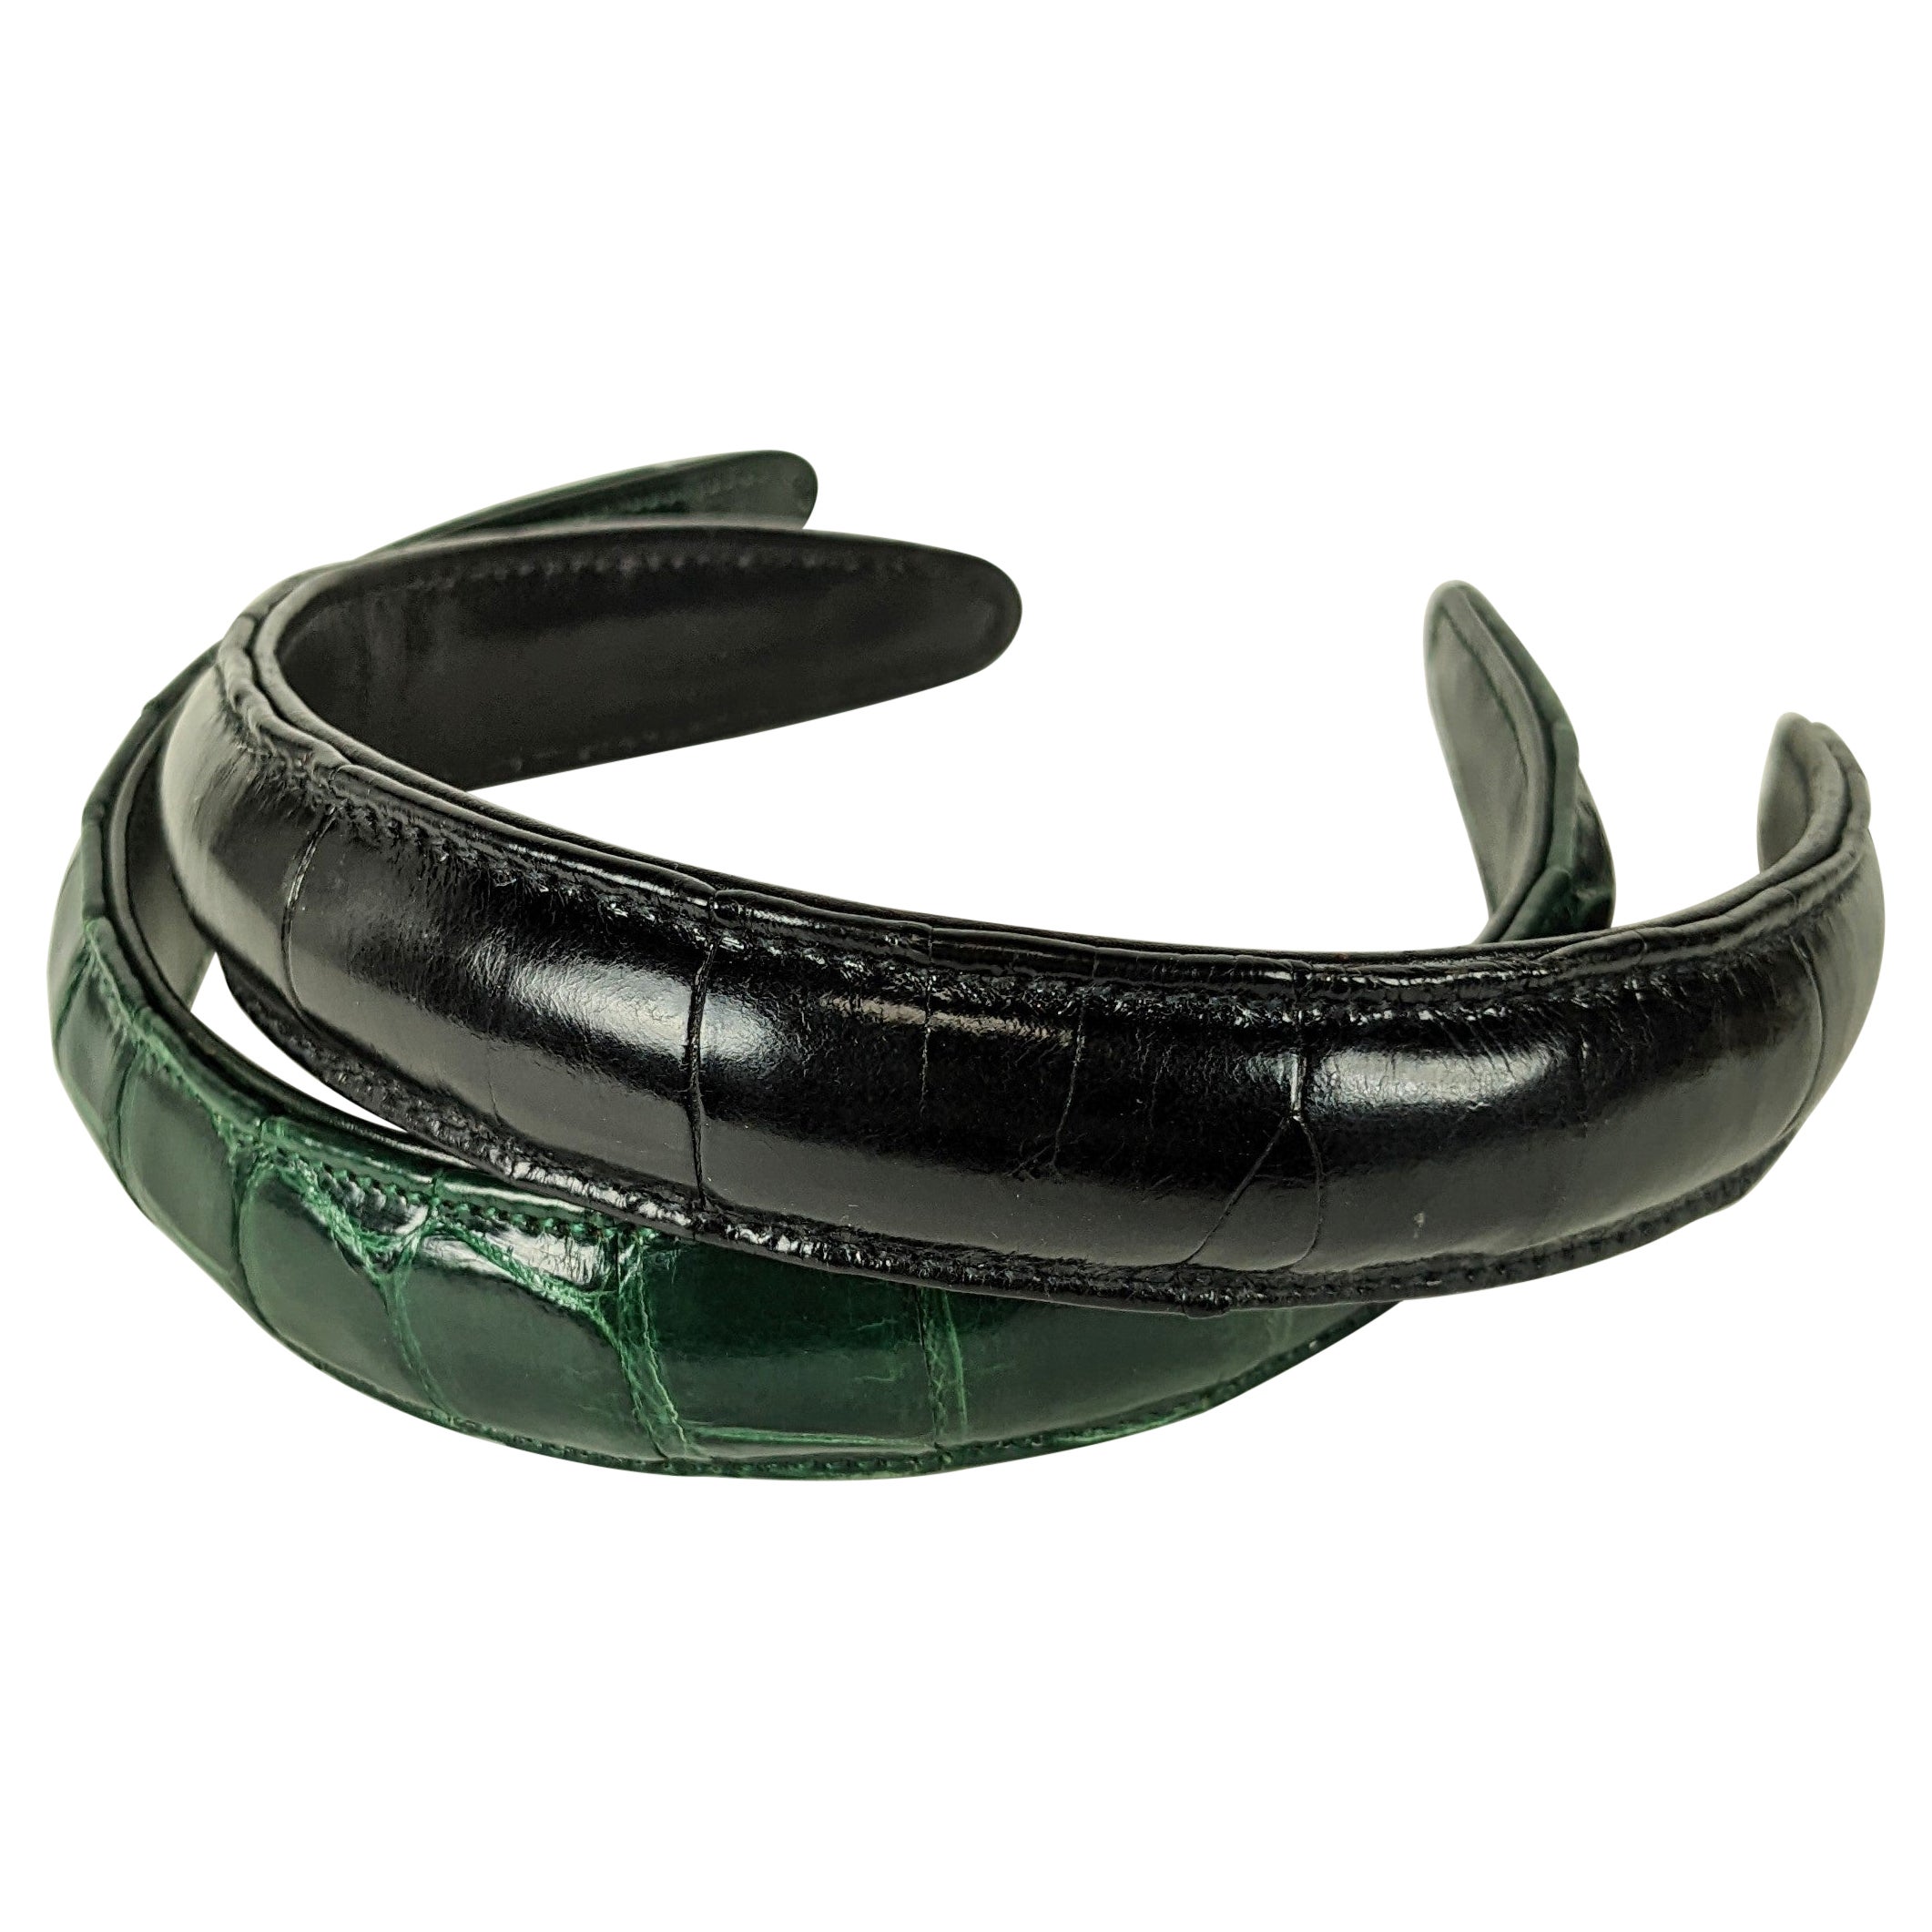 Pair of Alligator Hair Bands For Sale